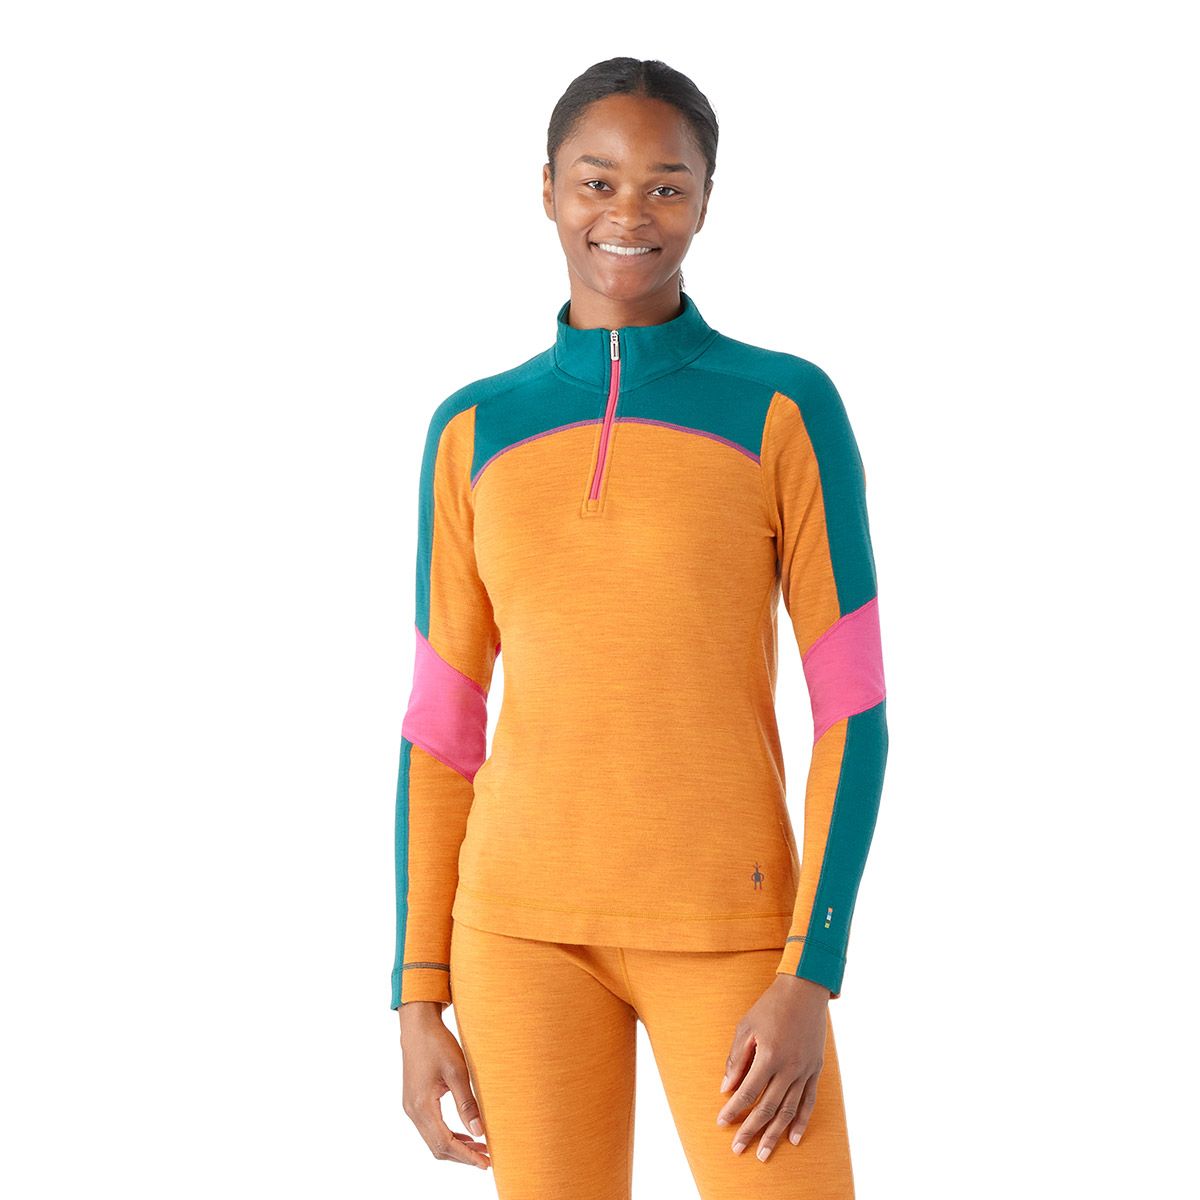 Women's base layers – Thermowave